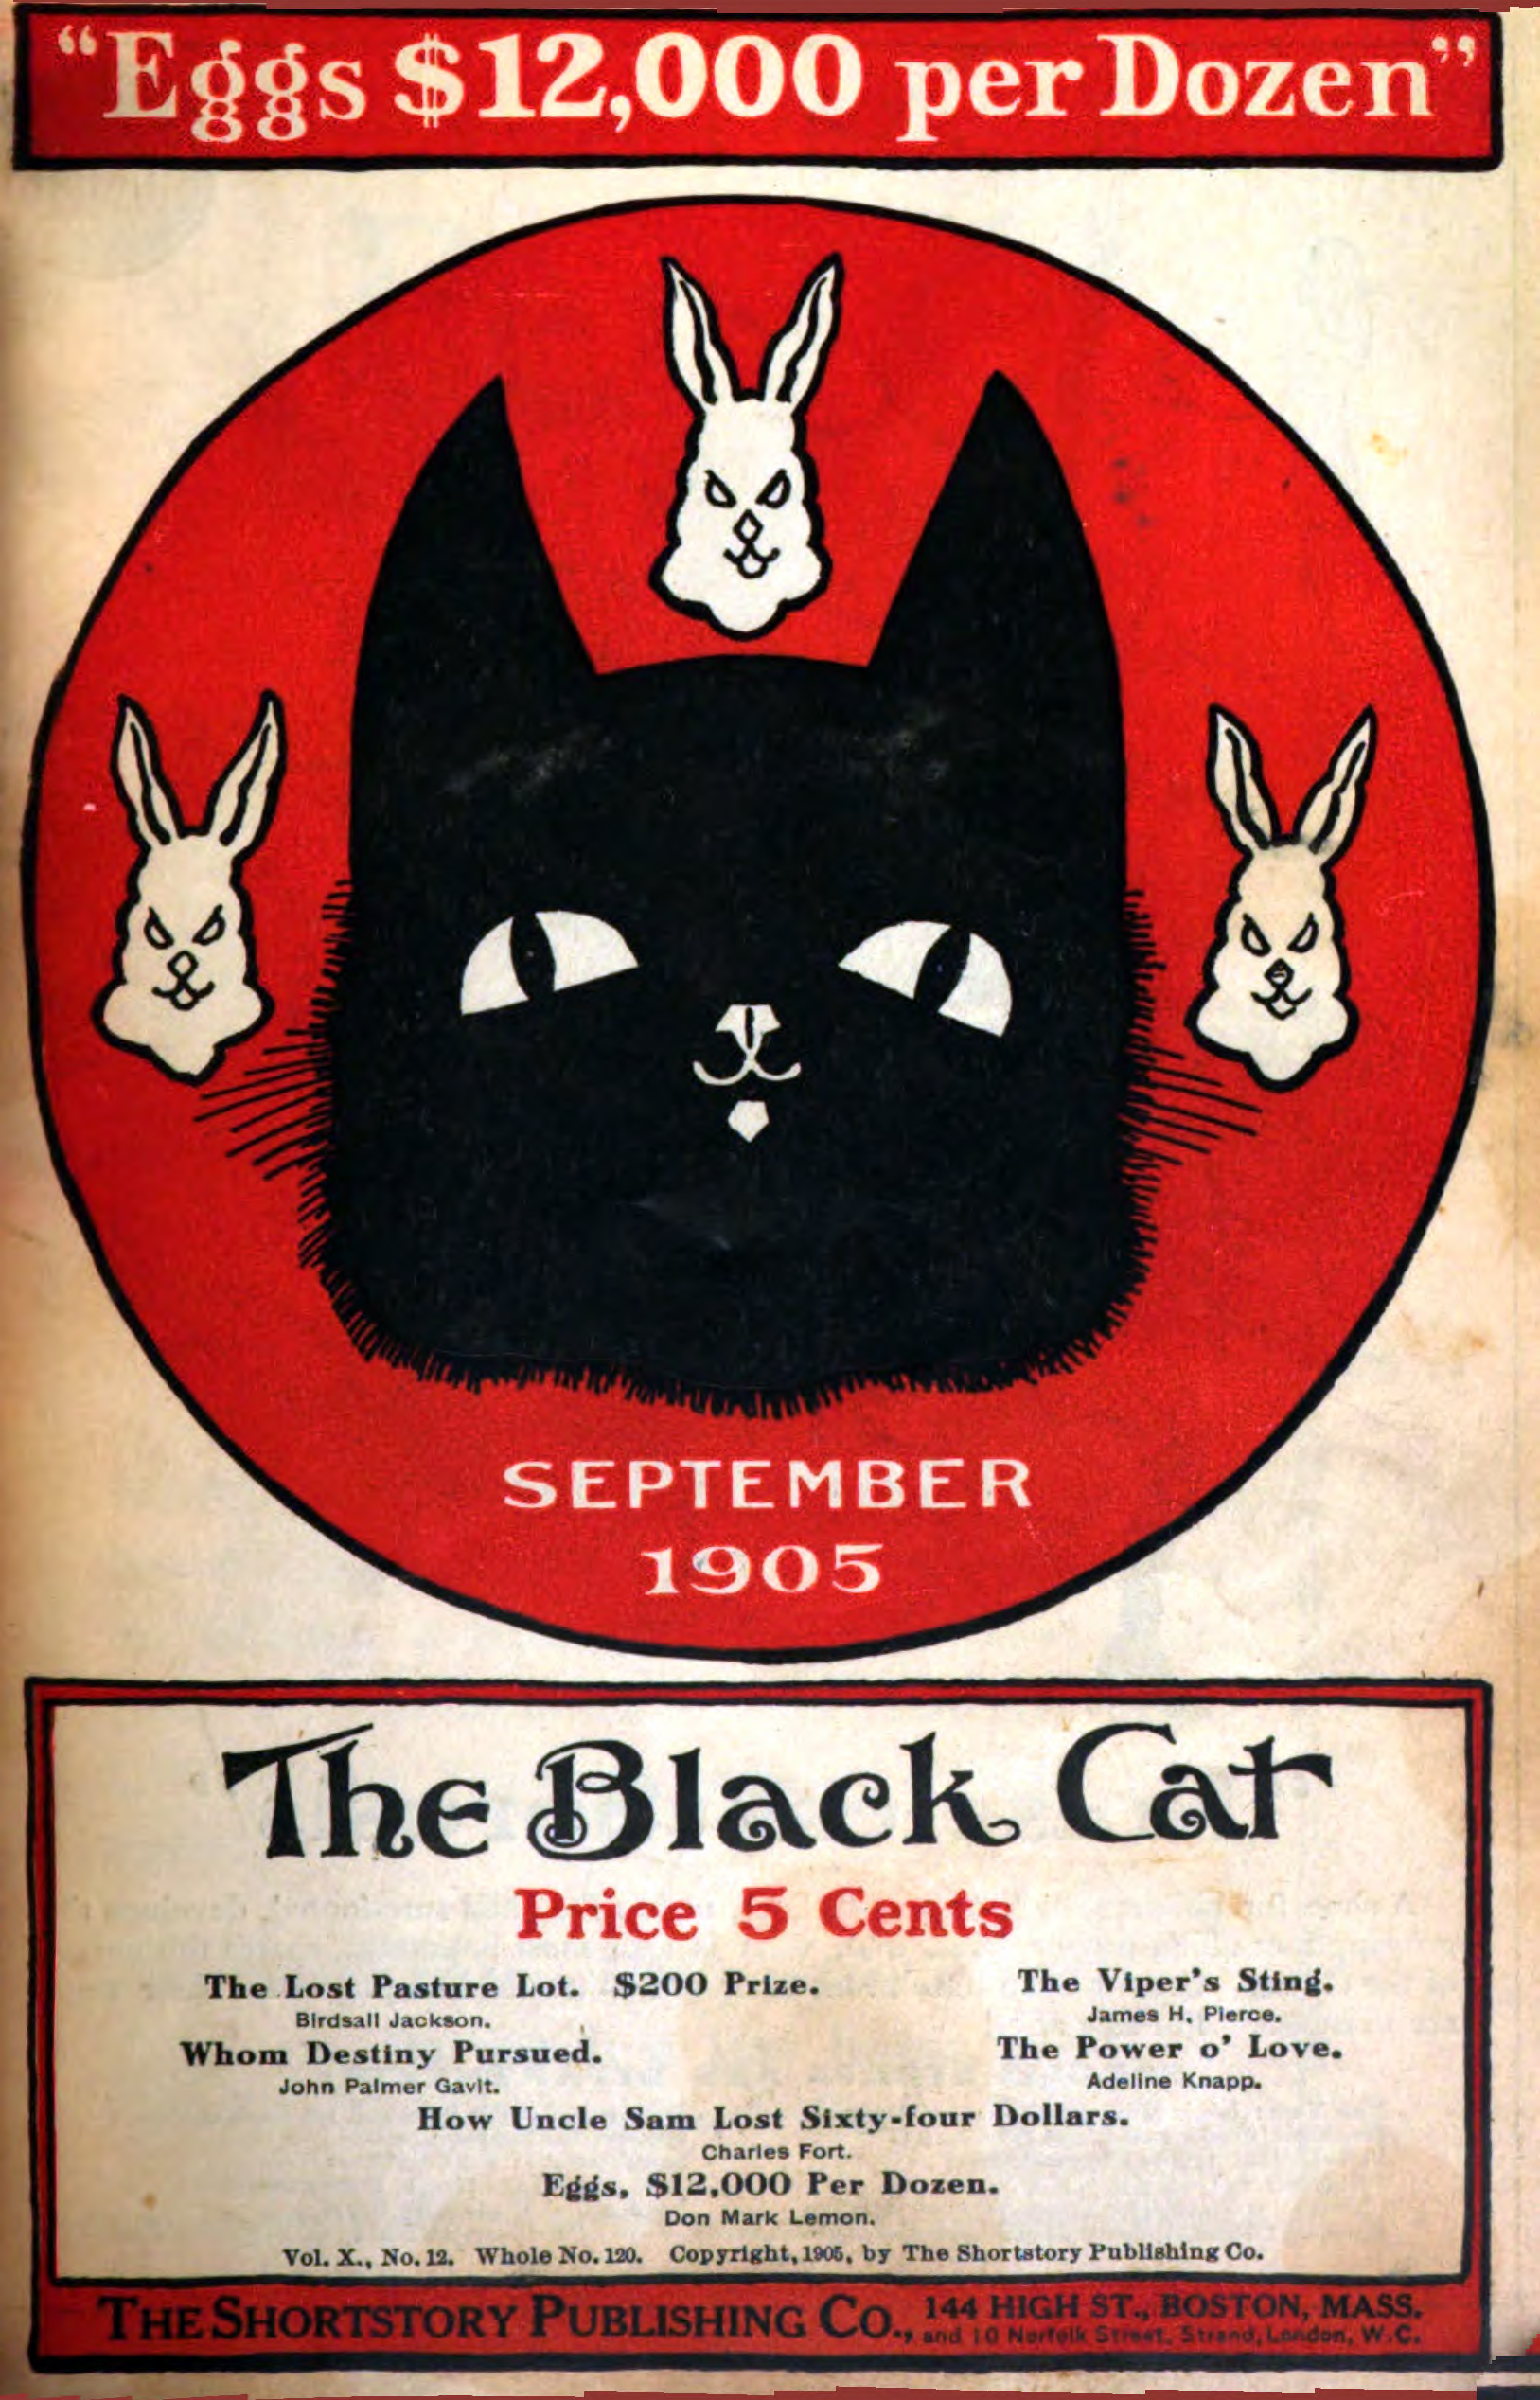 Selected Graphics from The Black Cat, September 1905